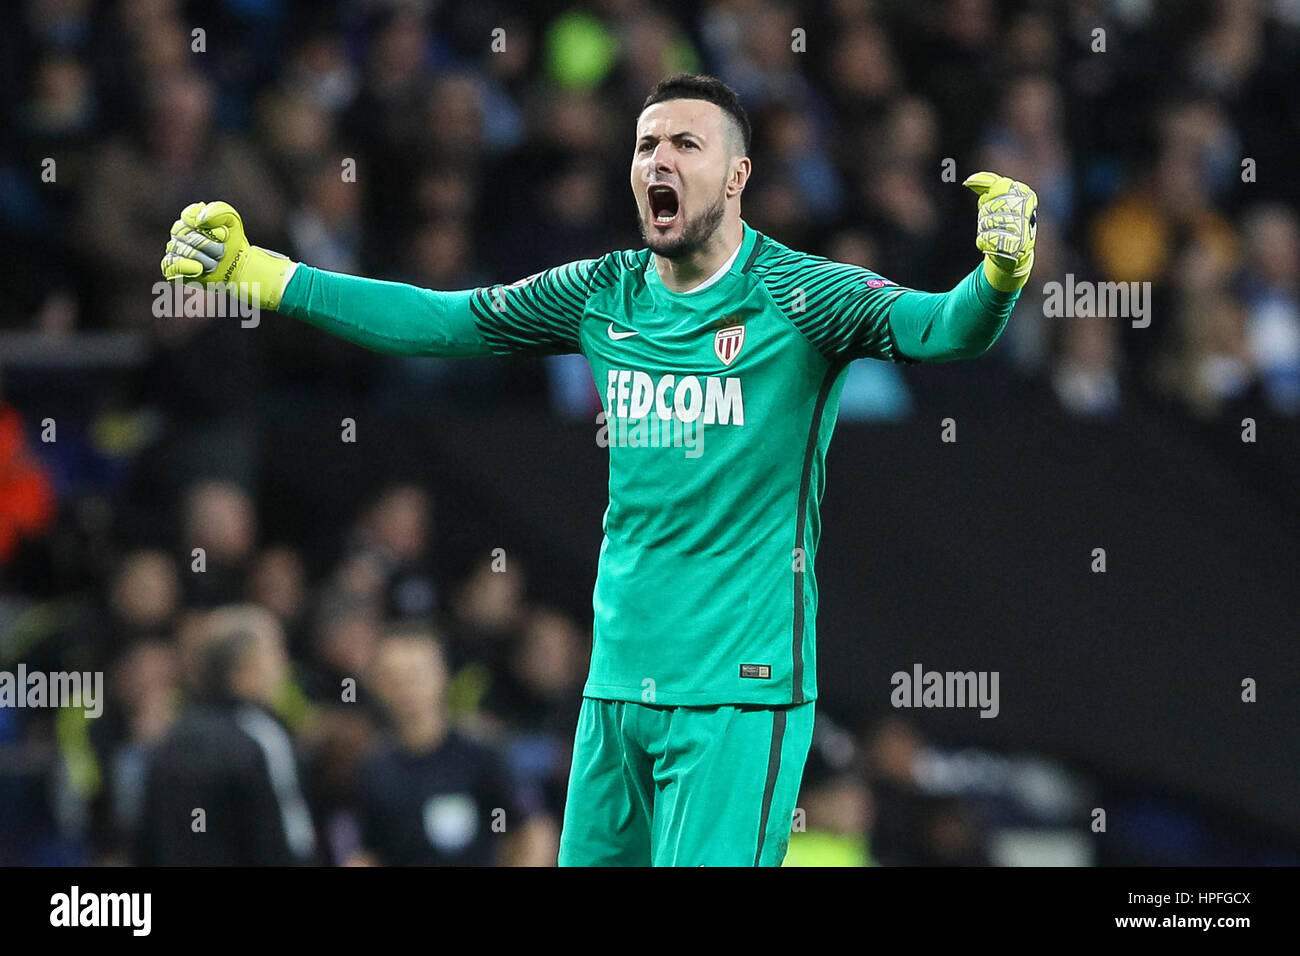 Manchester, UK. 21st Feb, 2017. Danijel Subasic of Monaco celebrates his side's second goal during the UEFA Champions League Round of 16 first leg match between Manchester City and AS Monaco at the Etihad Stadium on February 21st 2017 in Manchester, England. Credit: PHC Images/Alamy Live News Stock Photo